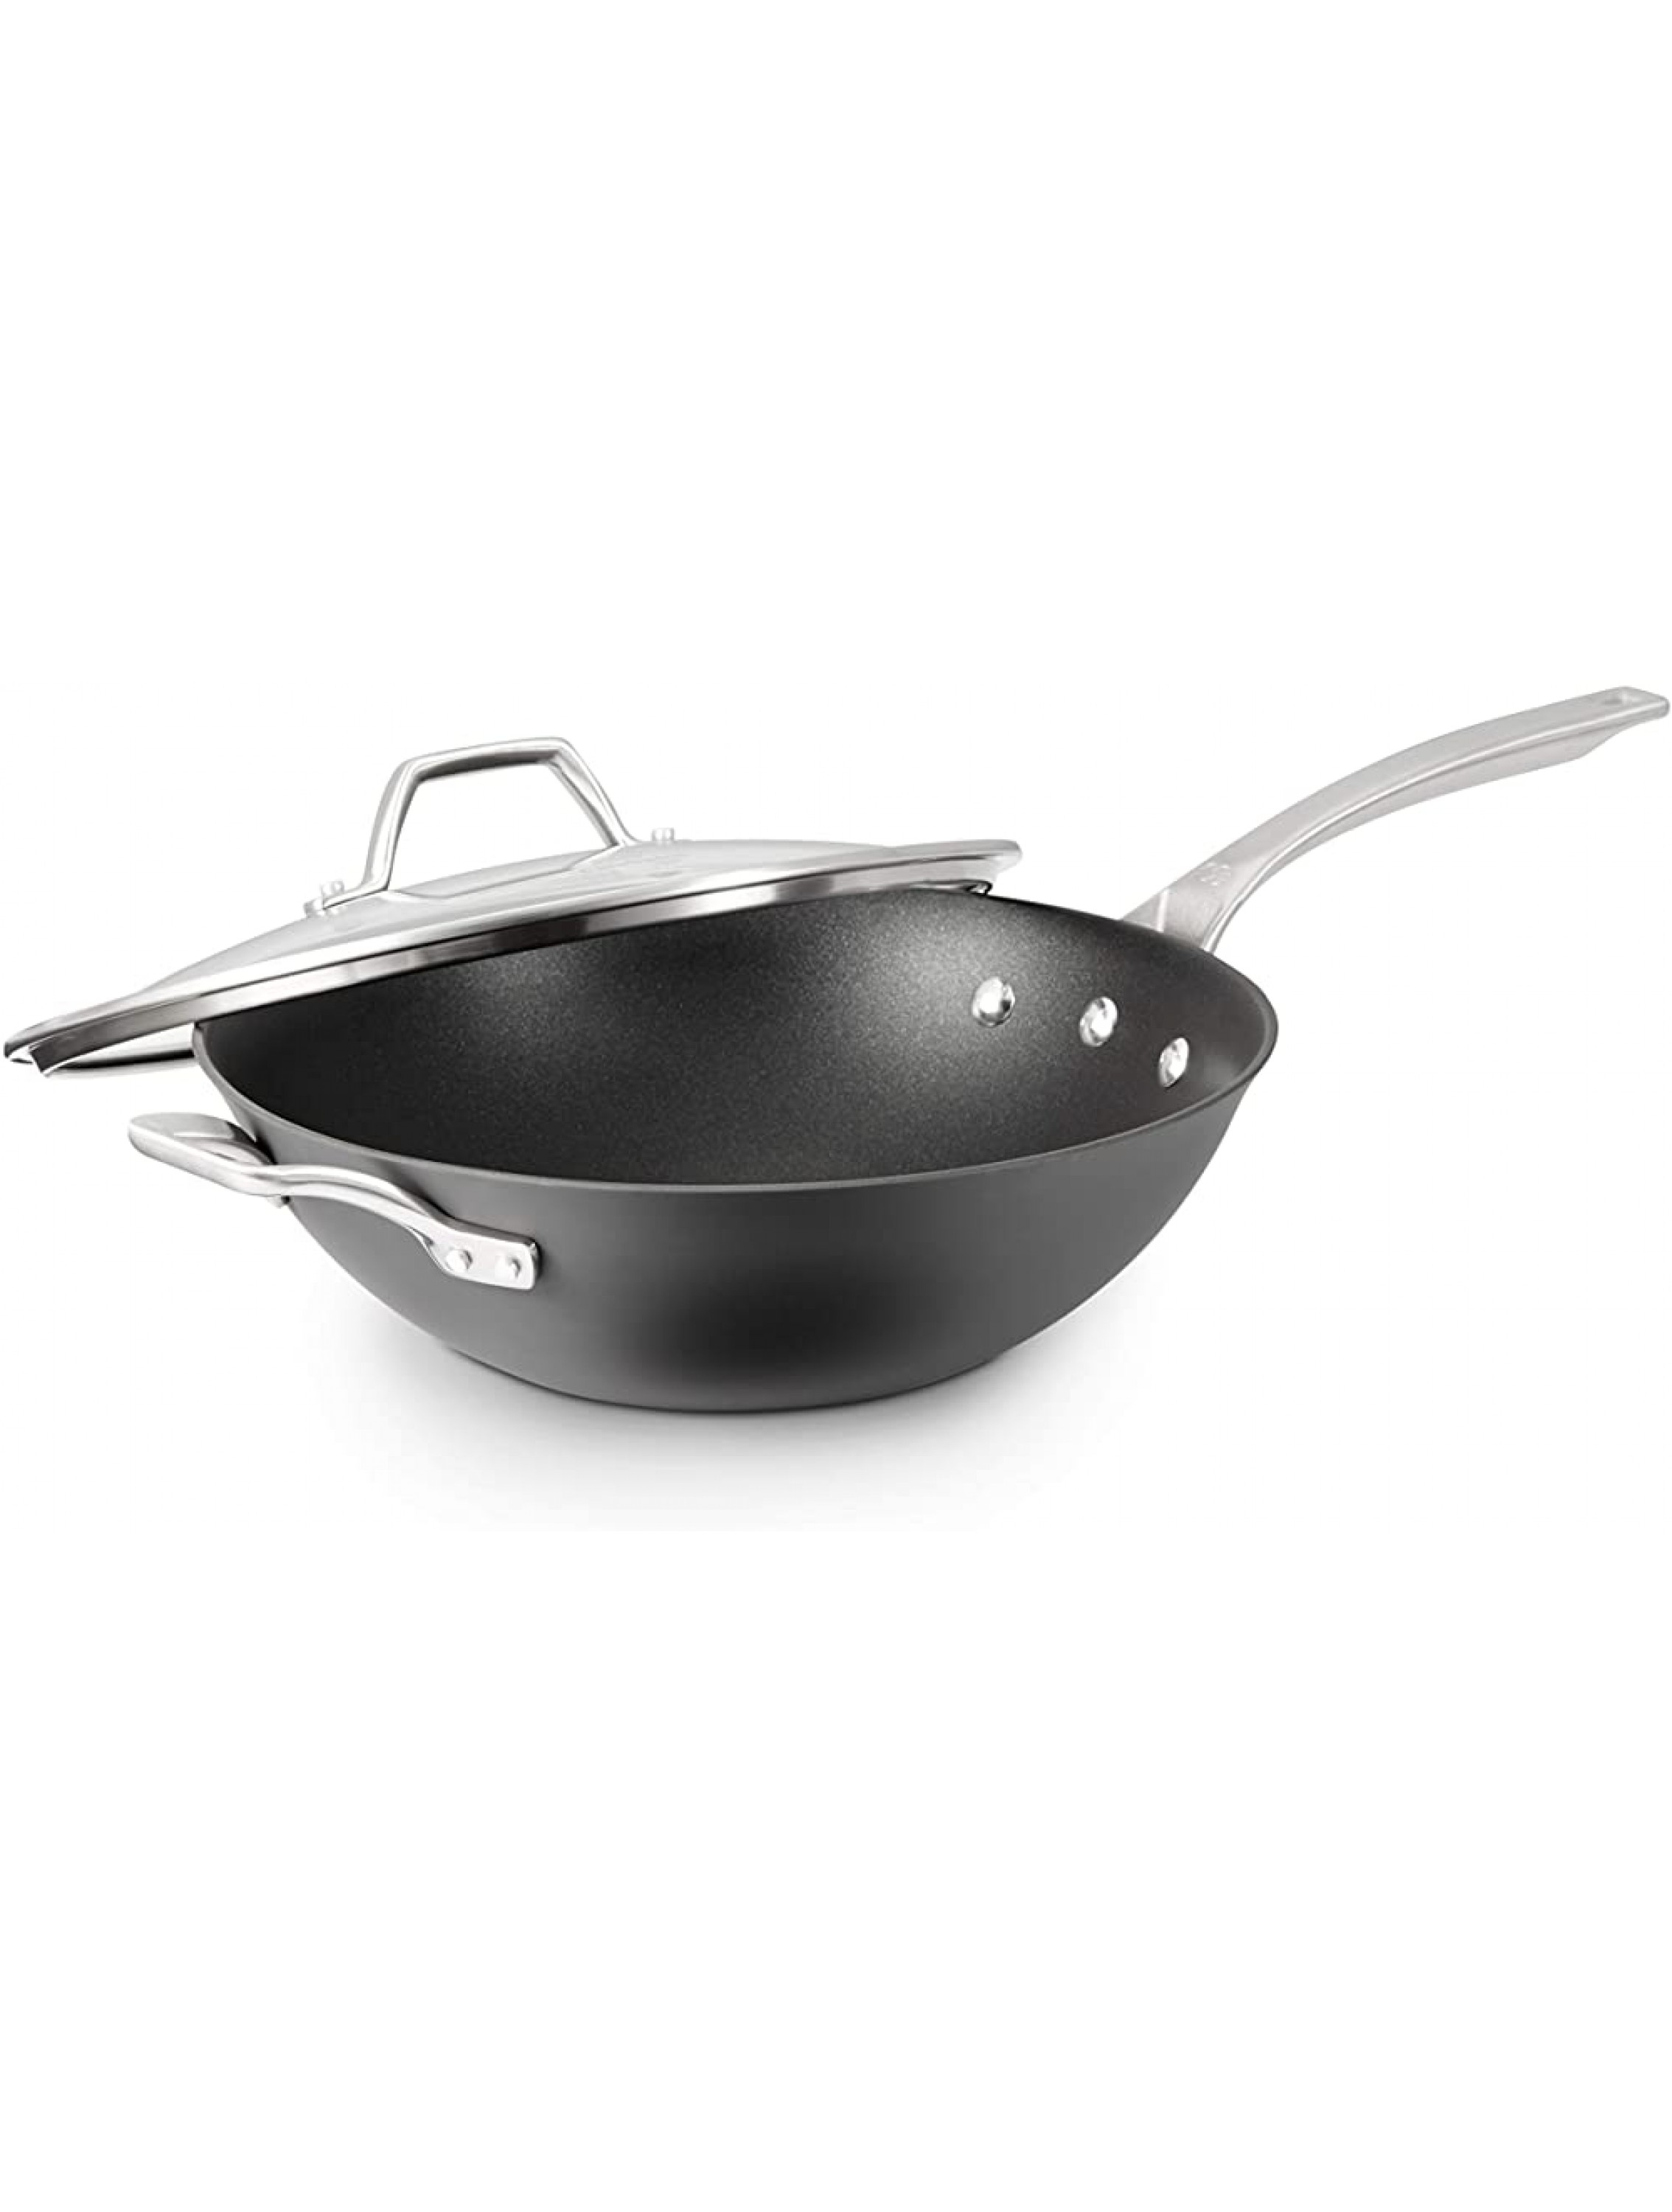 Calphalon Signature Hard-Anodized Nonstick 12-Inch Flat Bottom Wok with Cover - BCKA30CO4